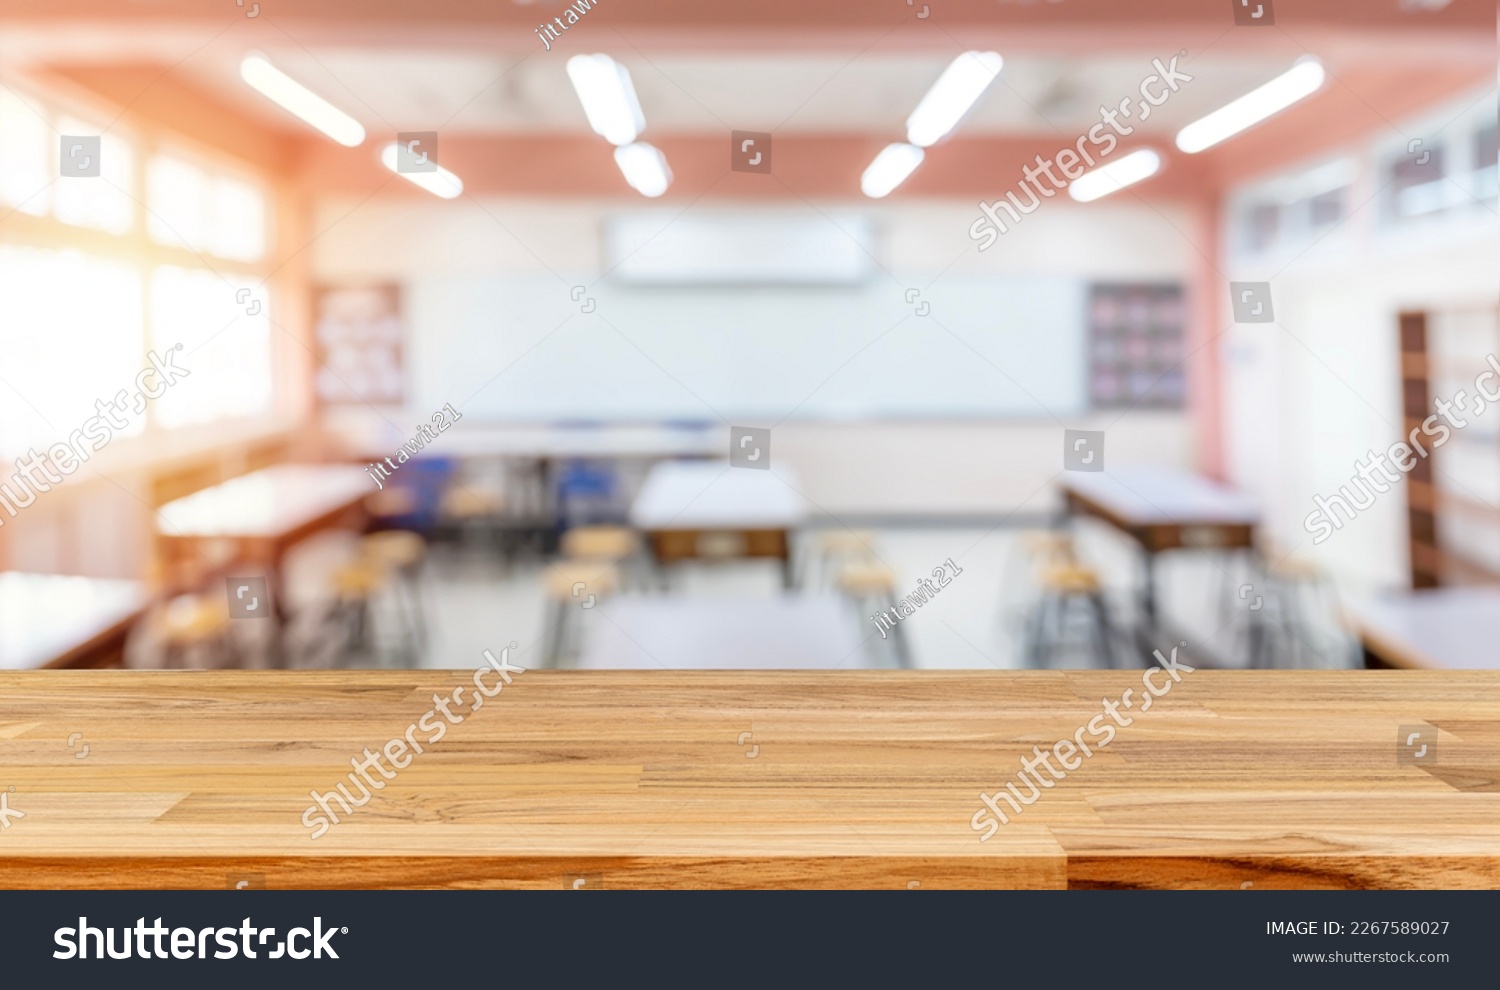 Cropped shot of wooden table with books, stationery and copy space in blurred study room.Empty classroom or presentation room interior with desks, chairs and whiteboard #2267589027